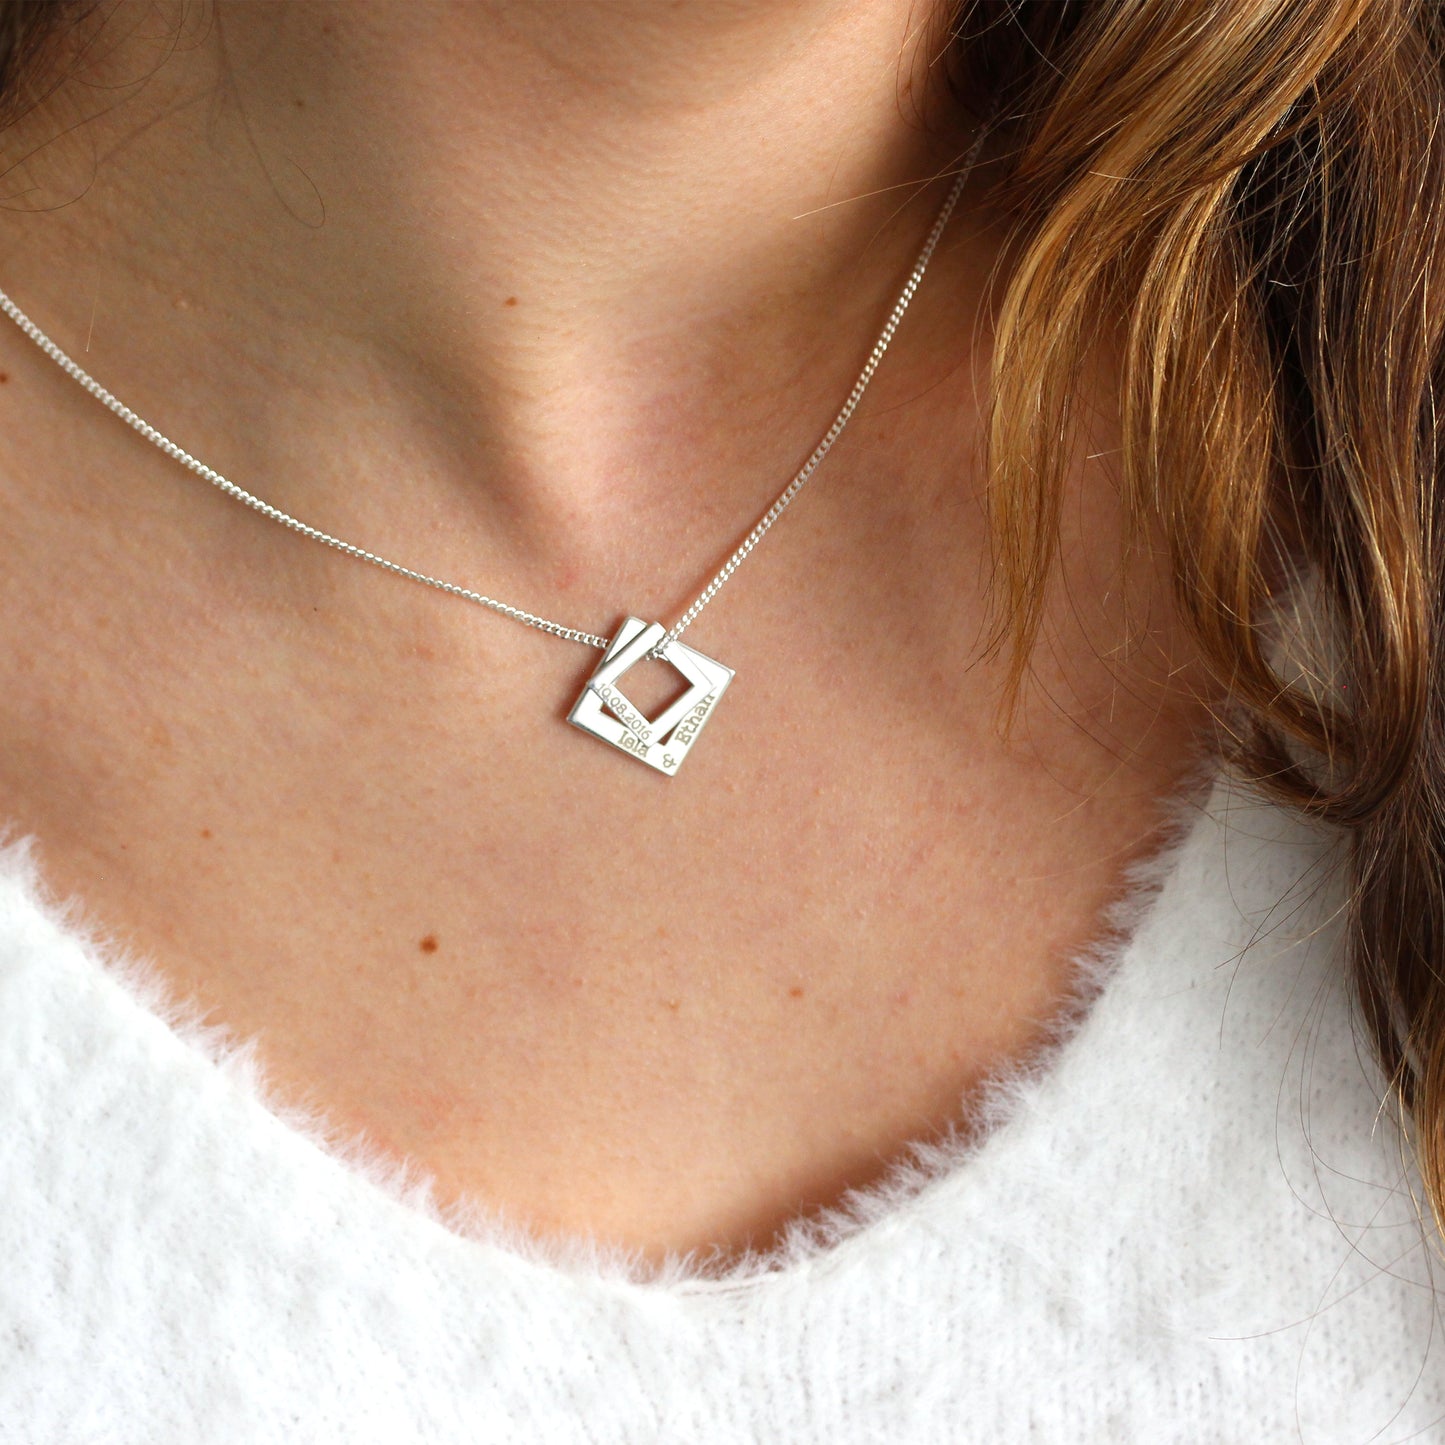 Bespoke Sterling Silver Double Square Name Necklace 16 - 28 Inches